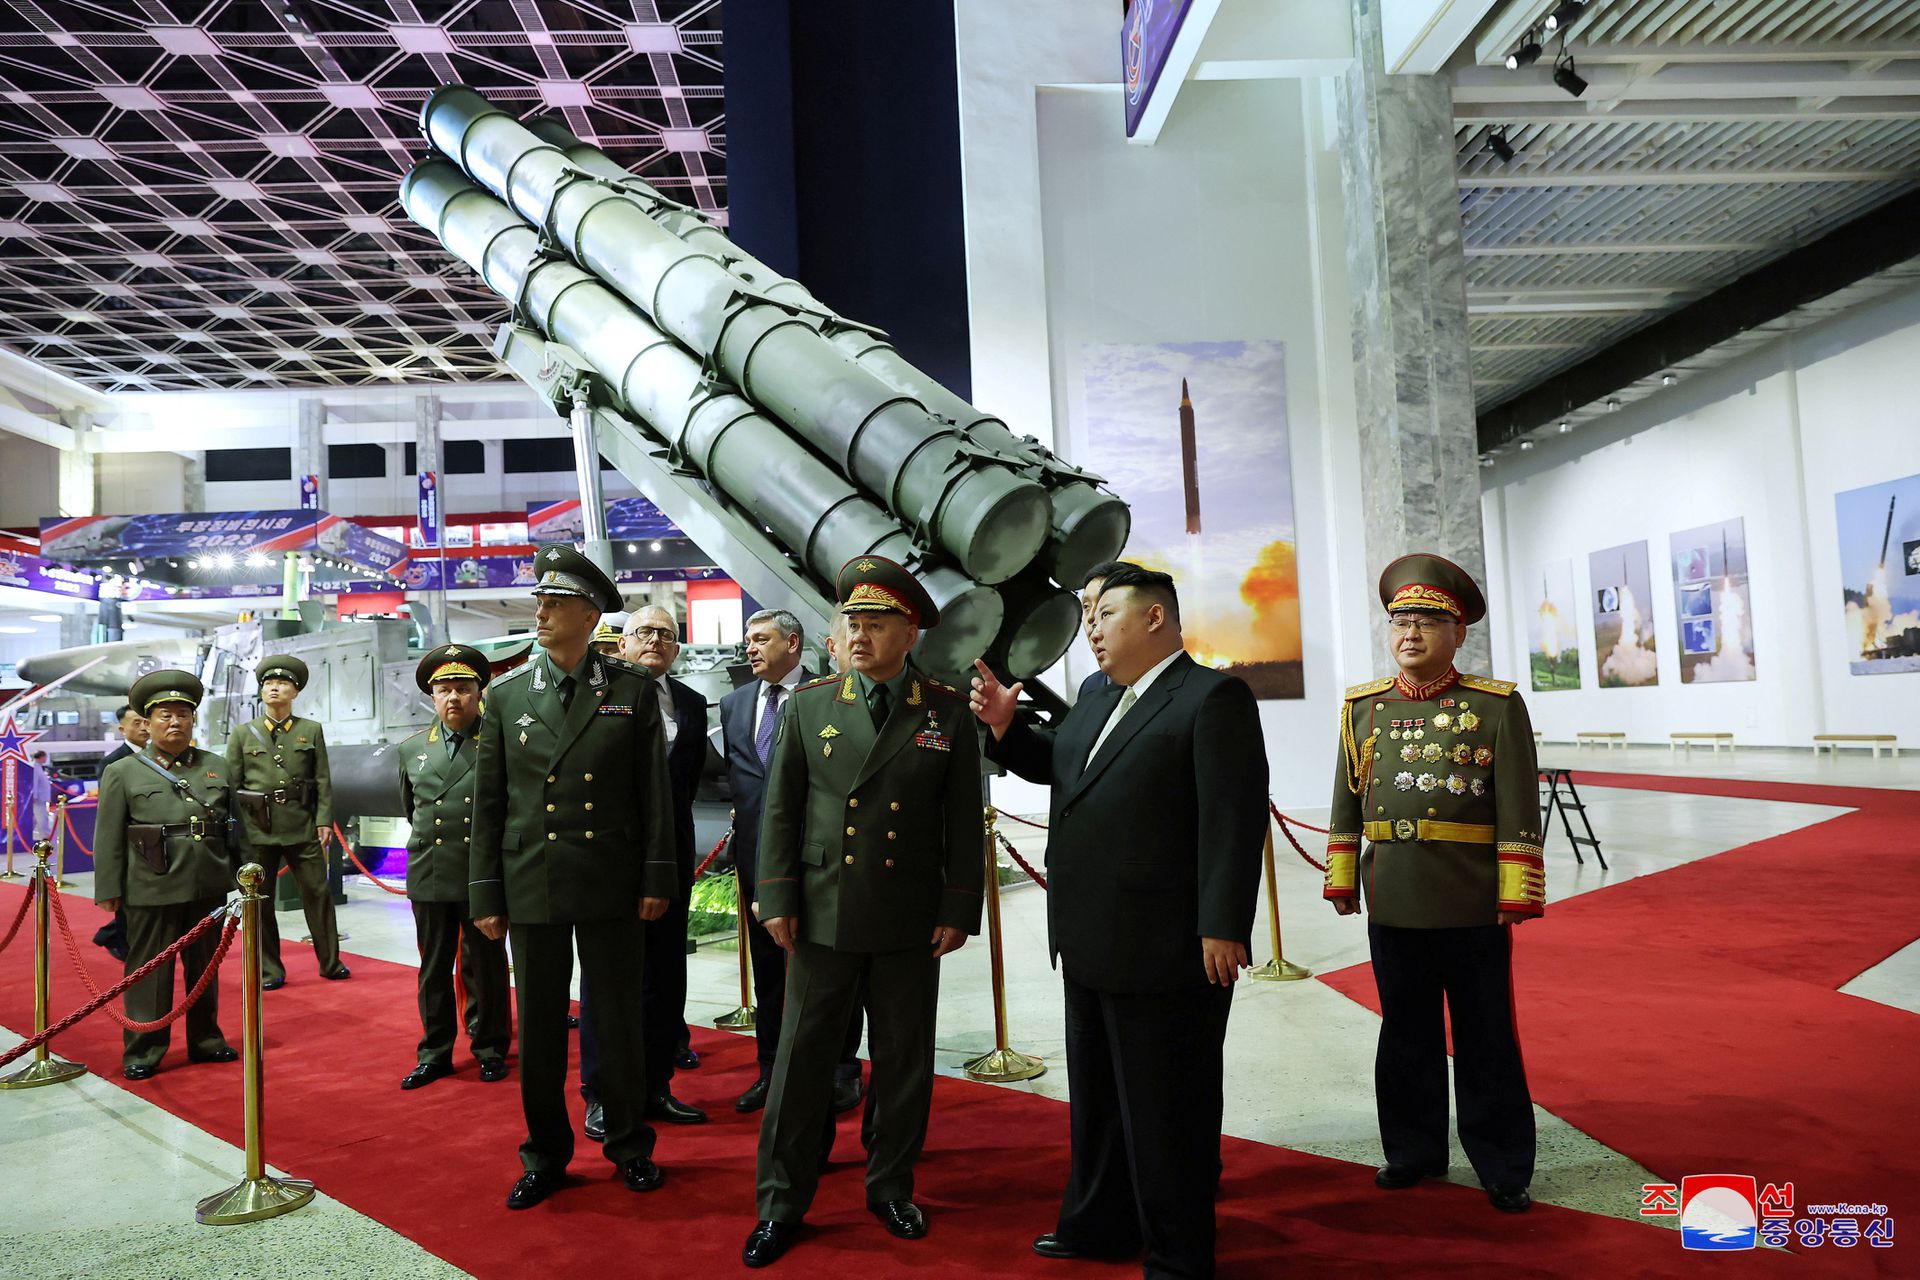 North Korean leader Kim Jong Un and Russia's Defense Minister Sergei Shoigu visit an exhibition of armed equipment on the occasion of the 70th anniversary of the Korean War armistice in this image released by North Korea's Korean Central News Agency on July 27, 2023. KCNA via REUTERS